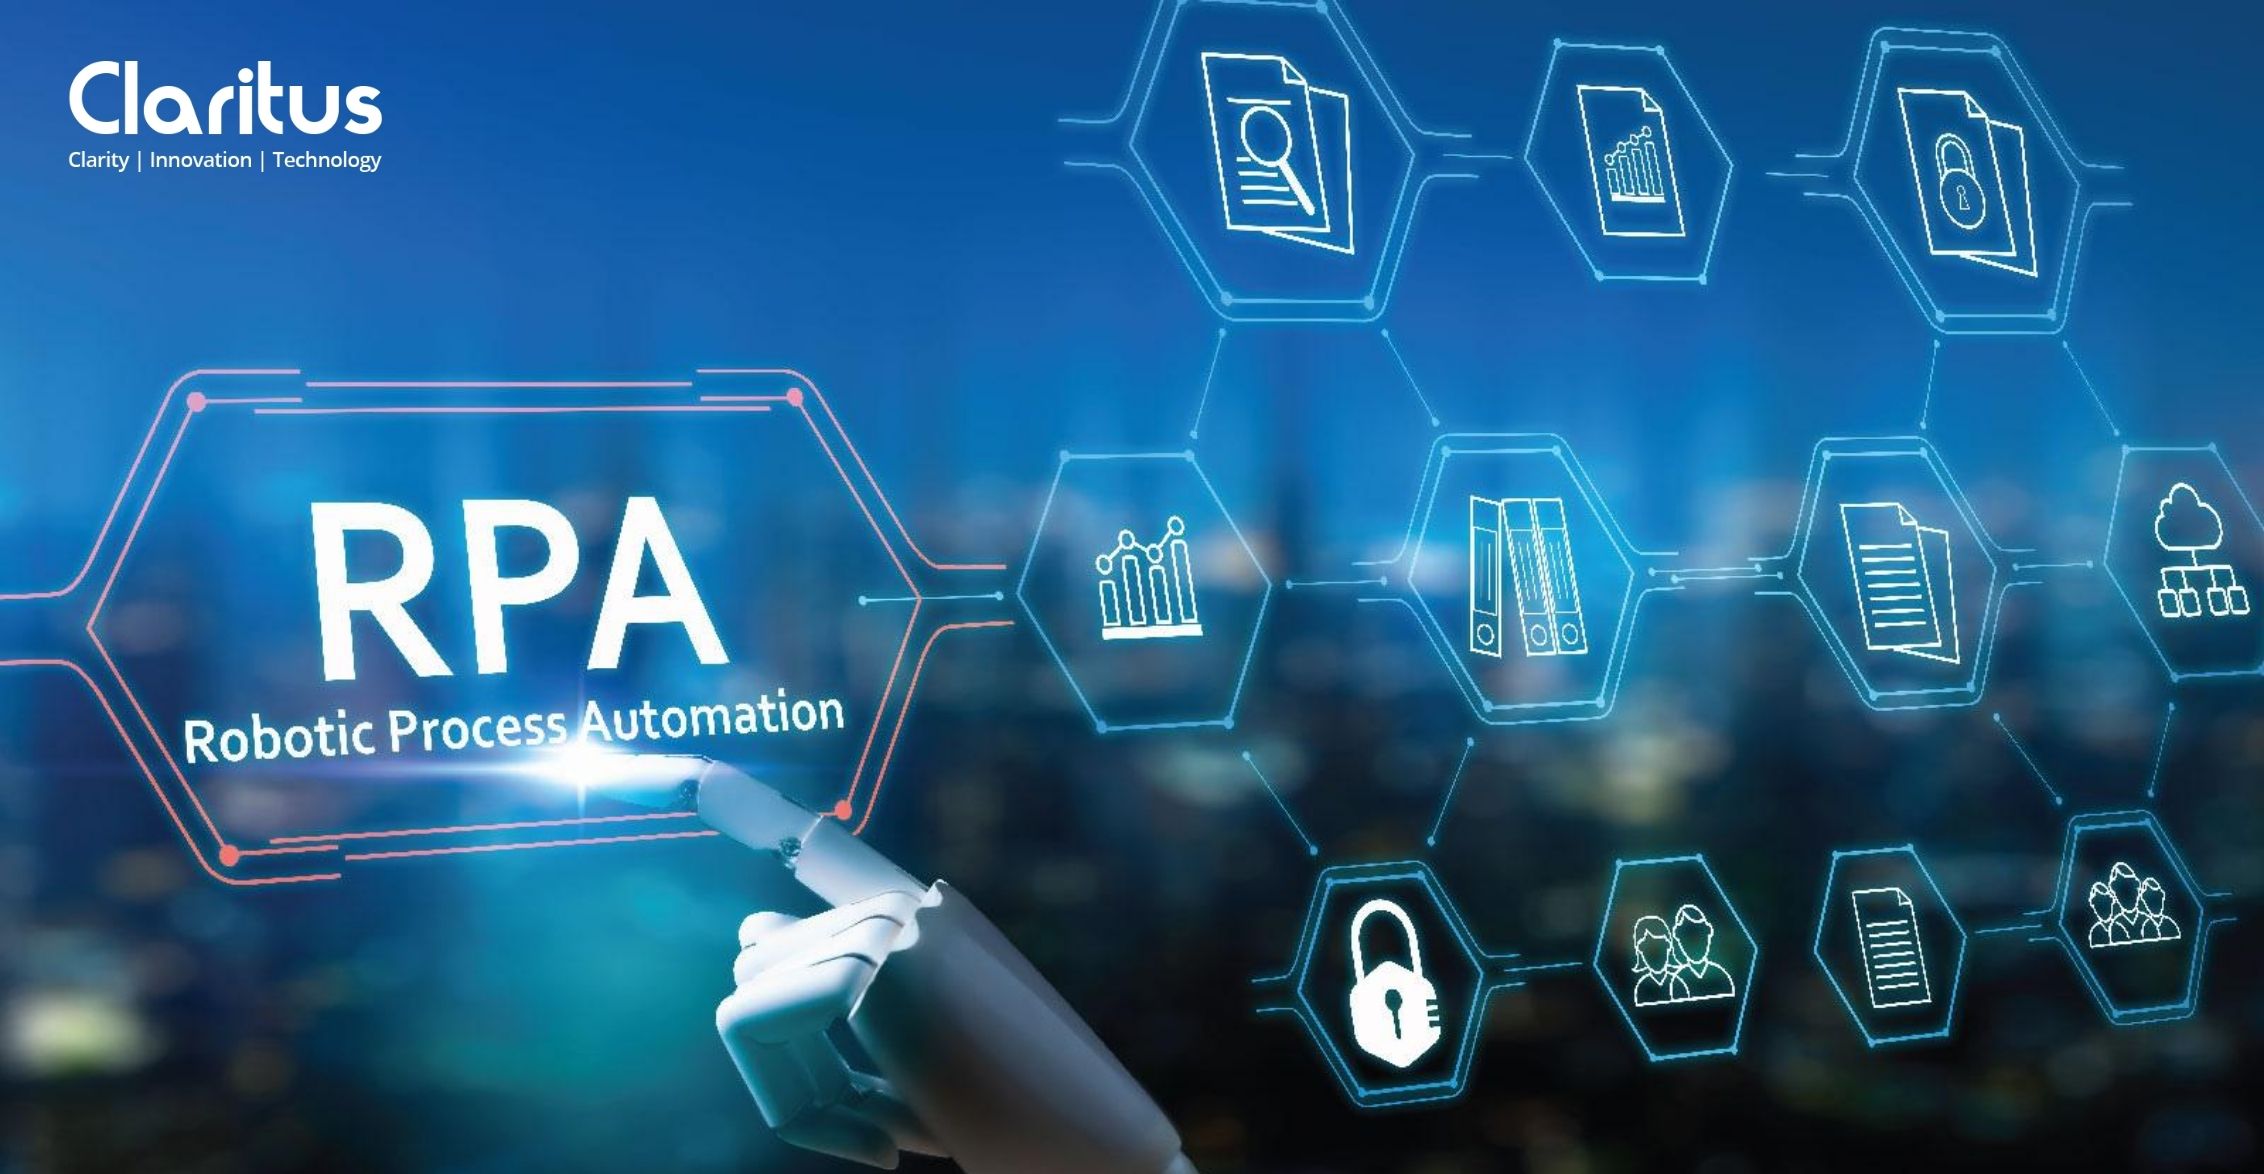 The Past and Future of Robotic Process Automation